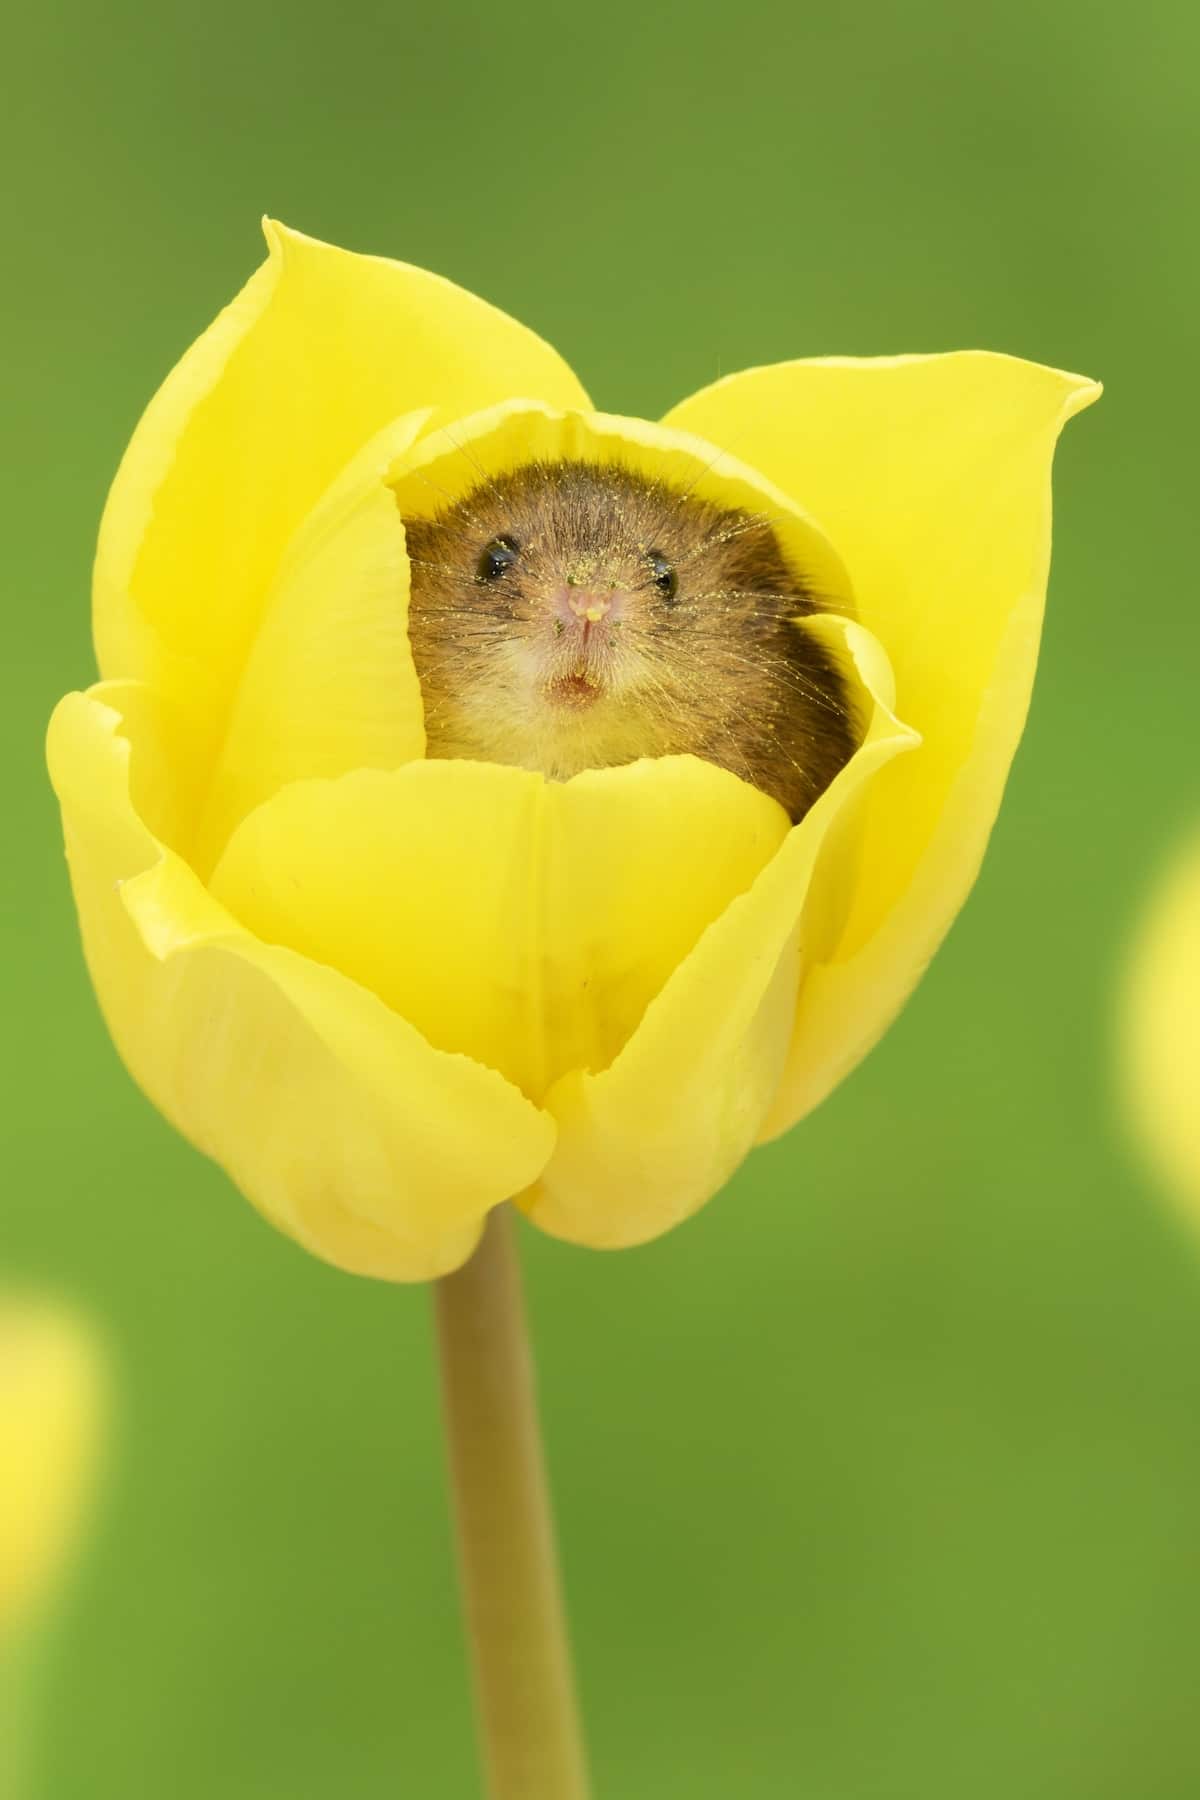 Mouse in a Flower